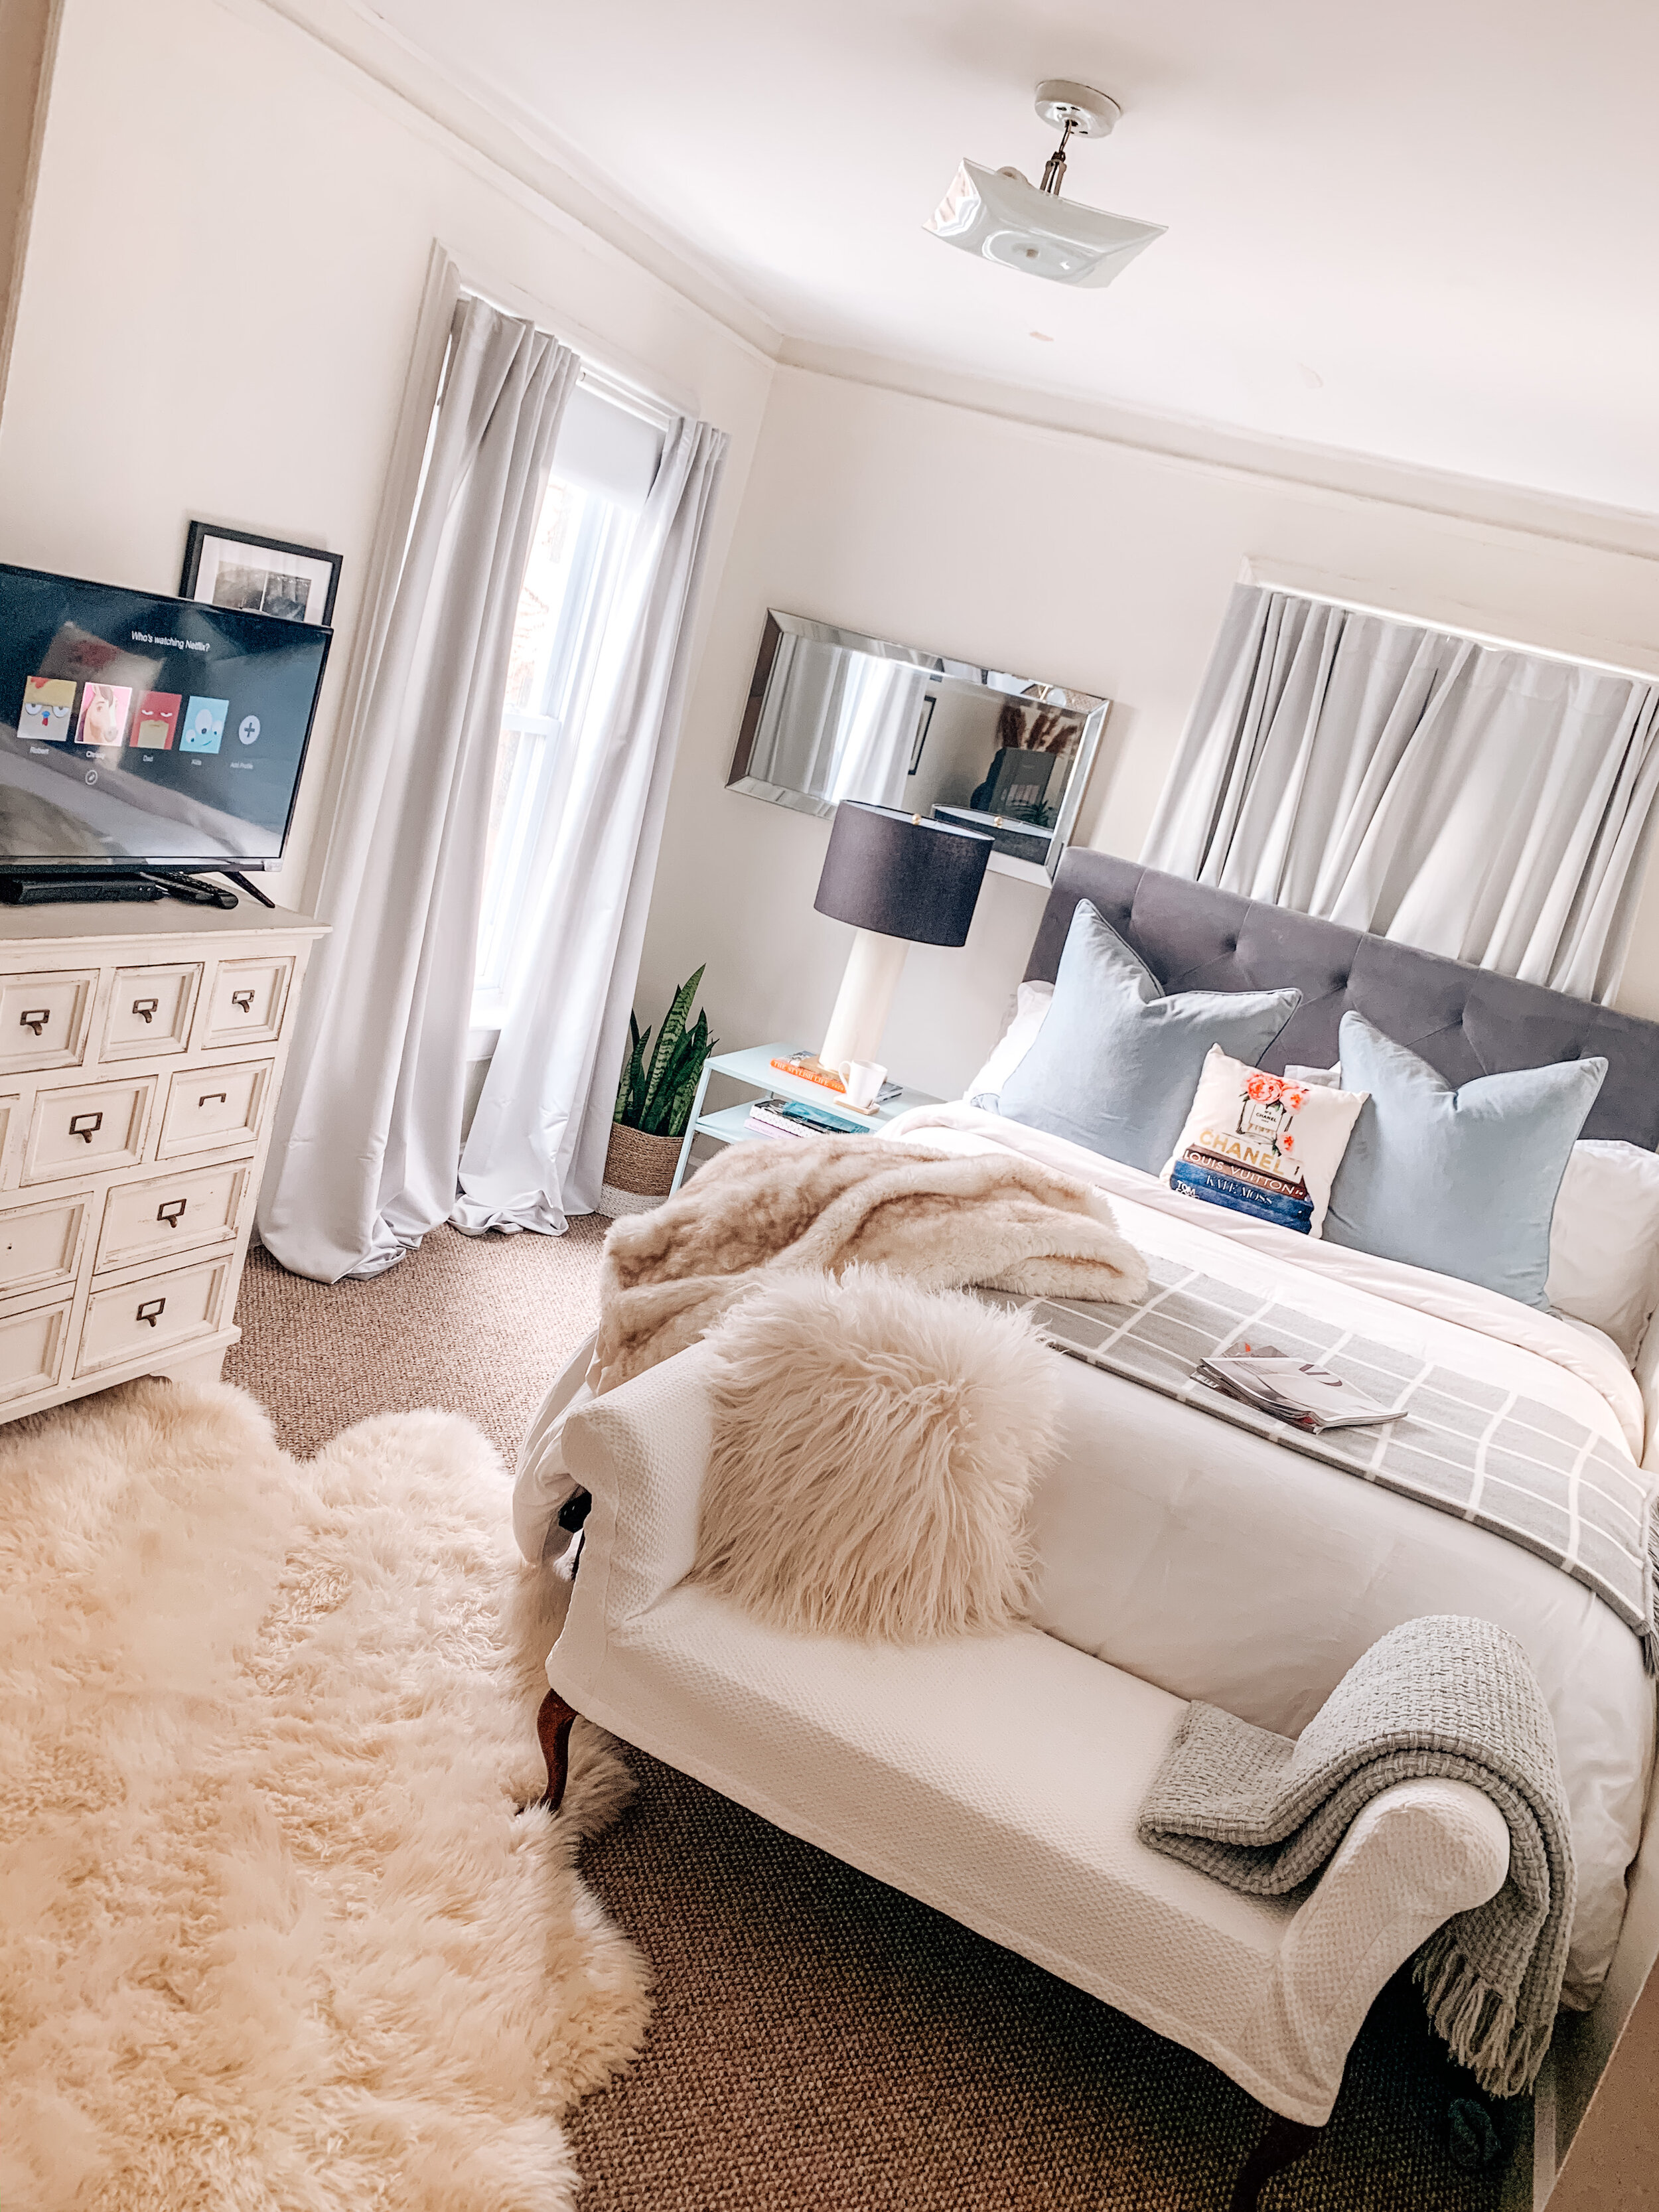 The Little, Big Bedroom Reveal! — little chateau